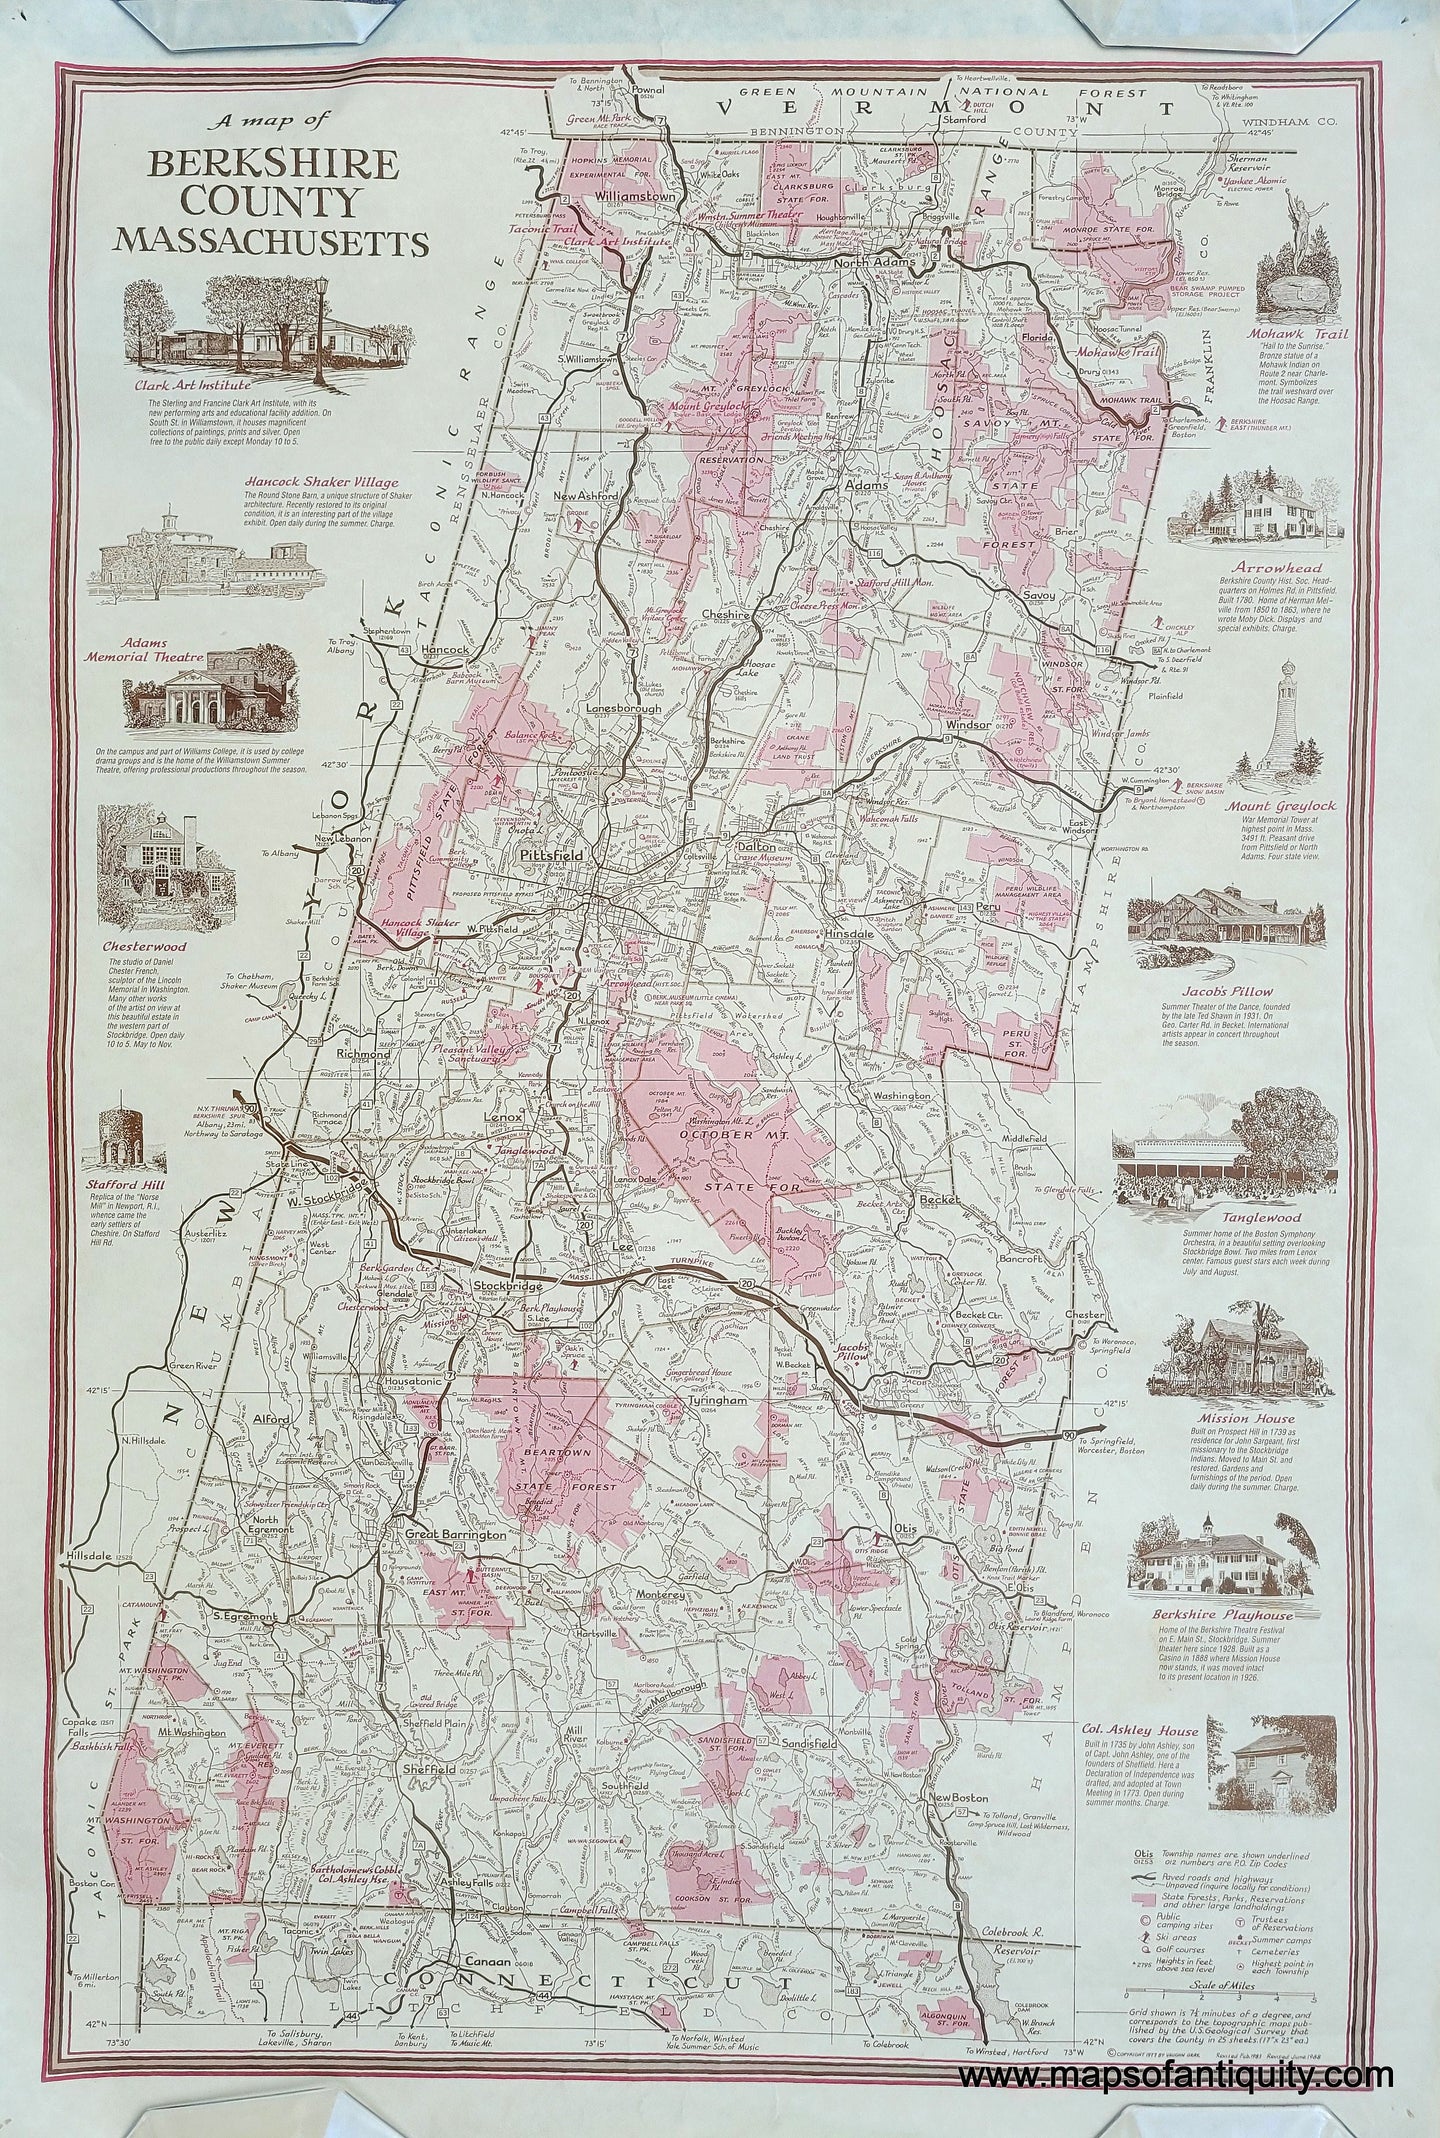 Genuine-Vintage-Map-A-Map-of-Berkshire-County-Massachusetts-1977-1988-Vaughn-Gray-Maps-Of-Antiquity